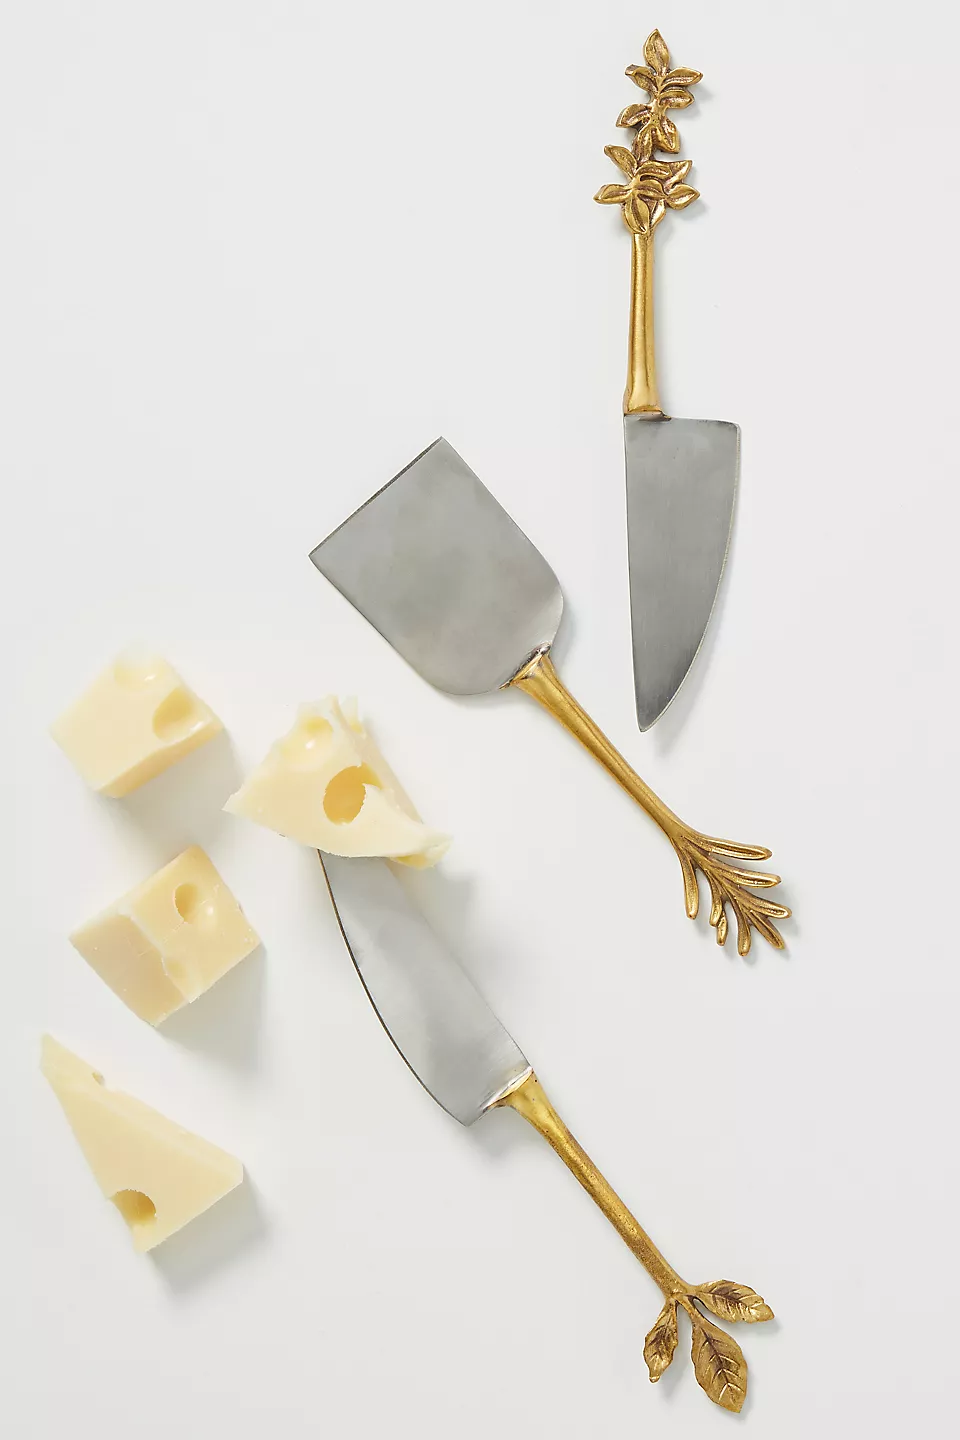 anthropologie.com | Herbiflora Cheese Knives, Set of 3